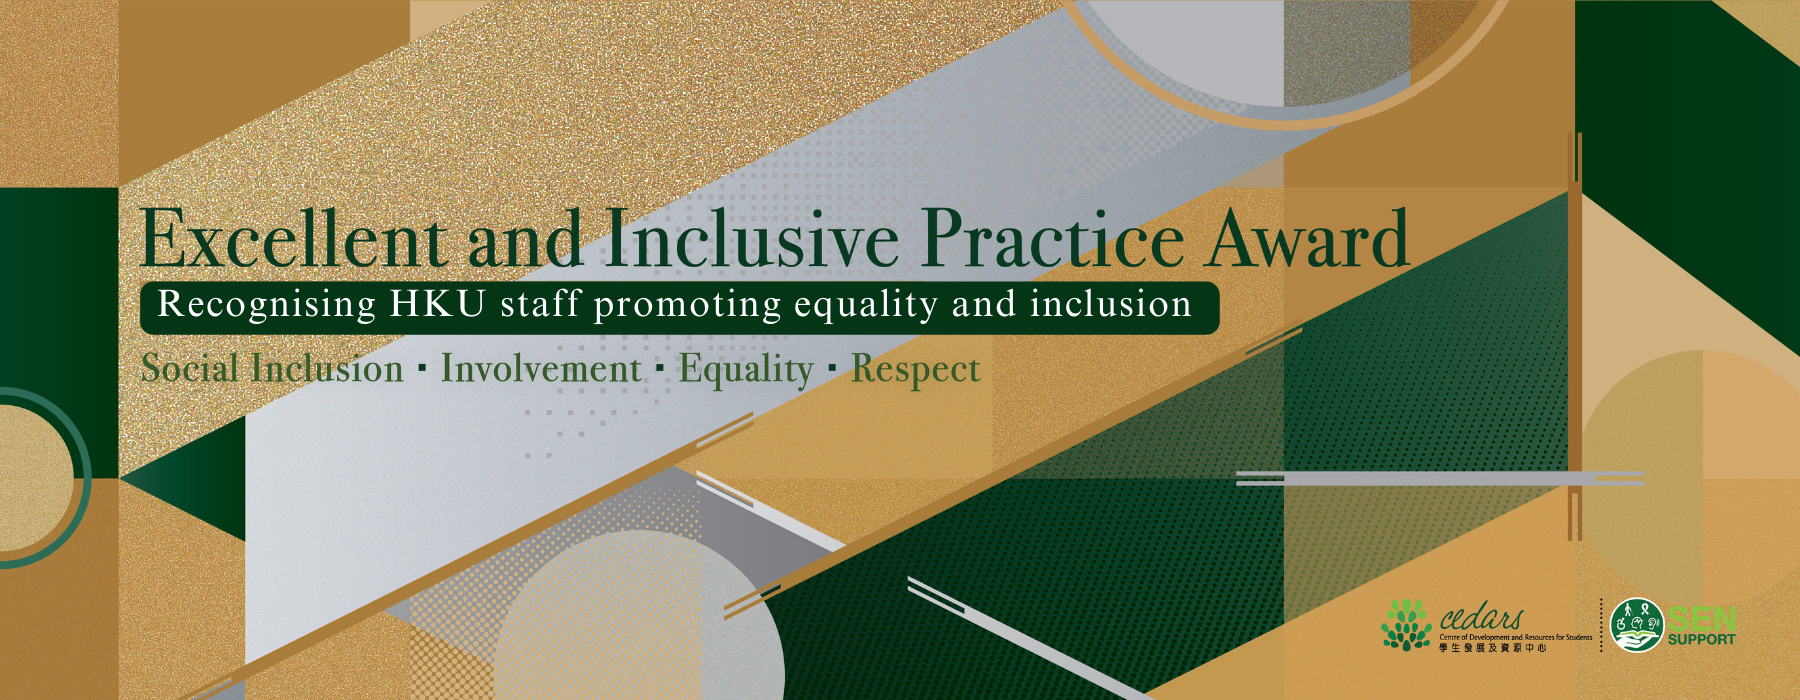 Excellent and Inclusive Practice Award Banner